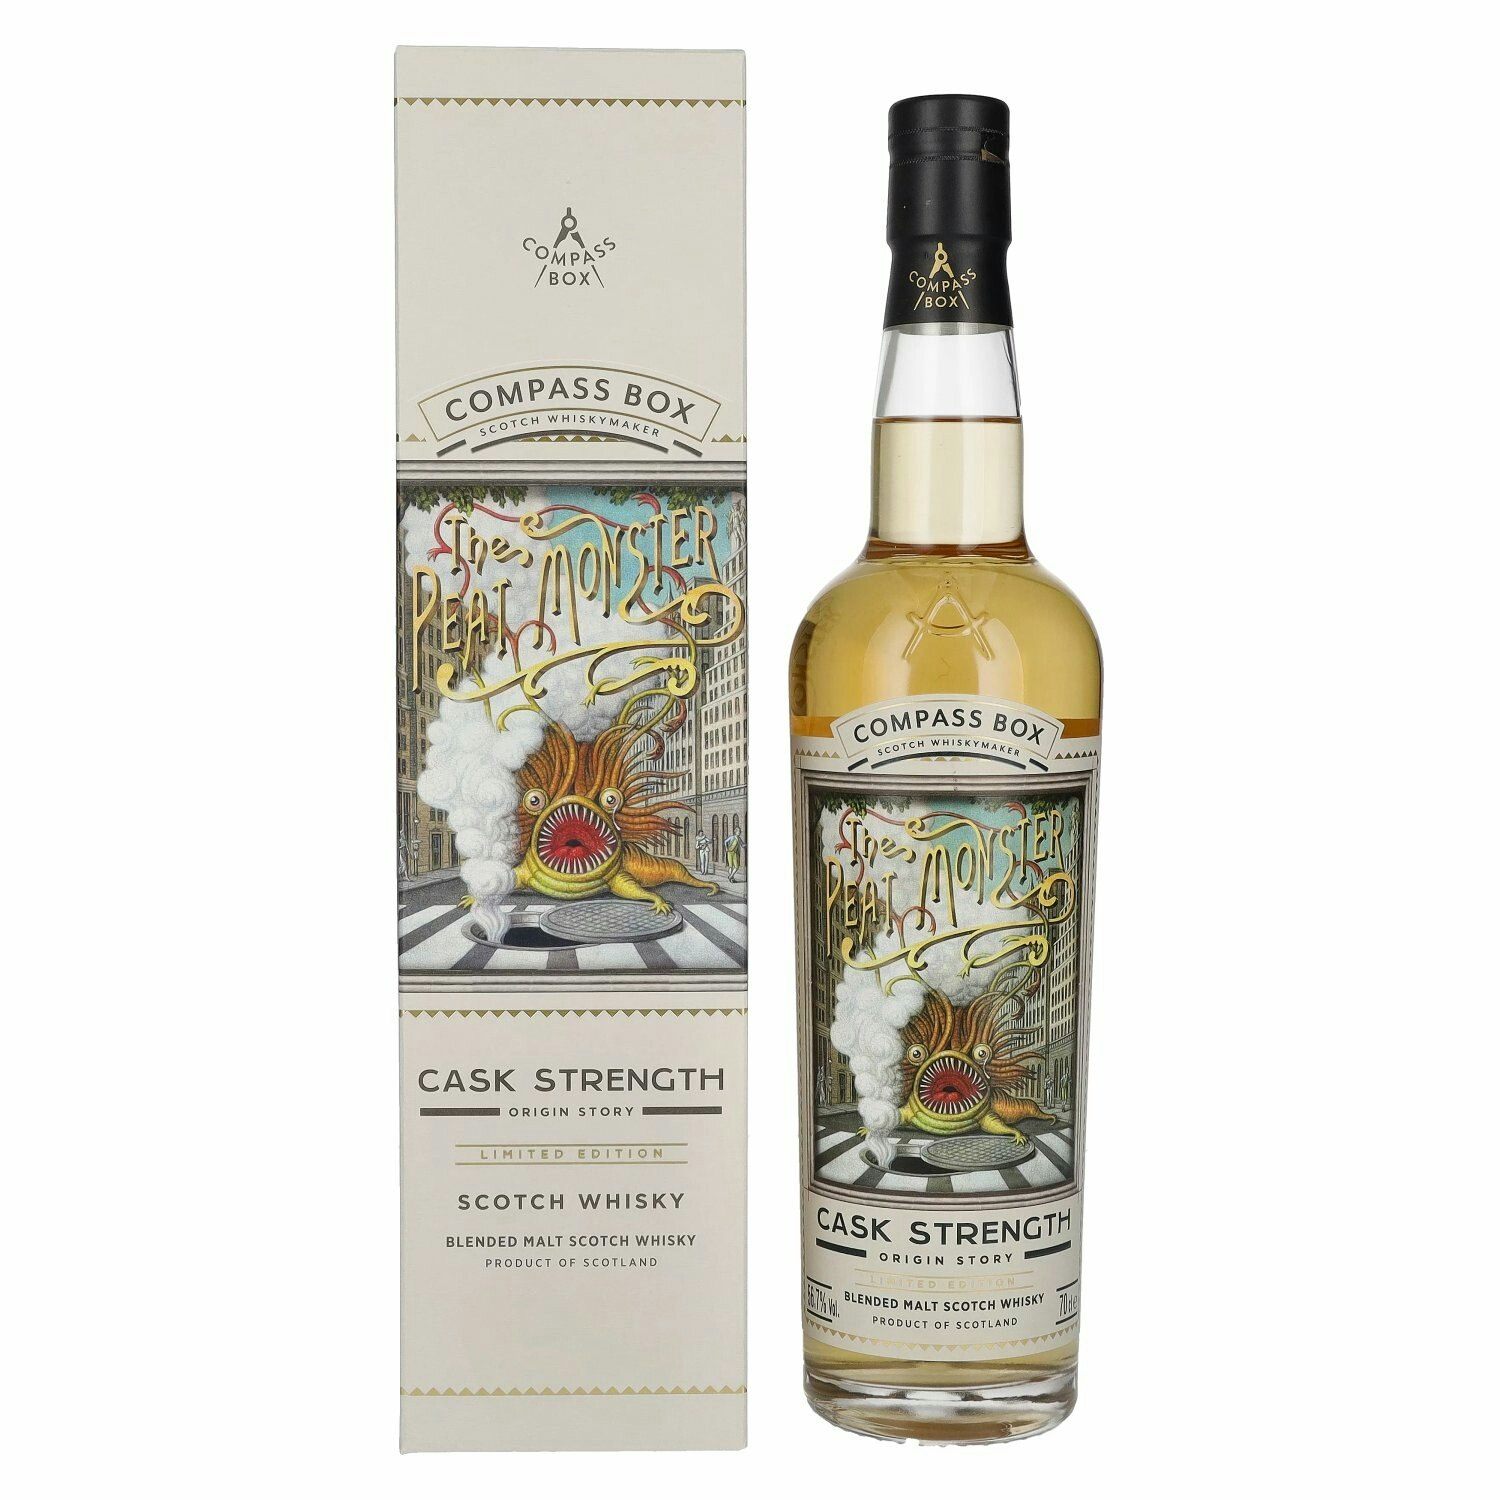 Compass Box THE PEAT MONSTER Cask Strength Blended Malt Limited Edition 56,7% Vol. 0,7l in Giftbox